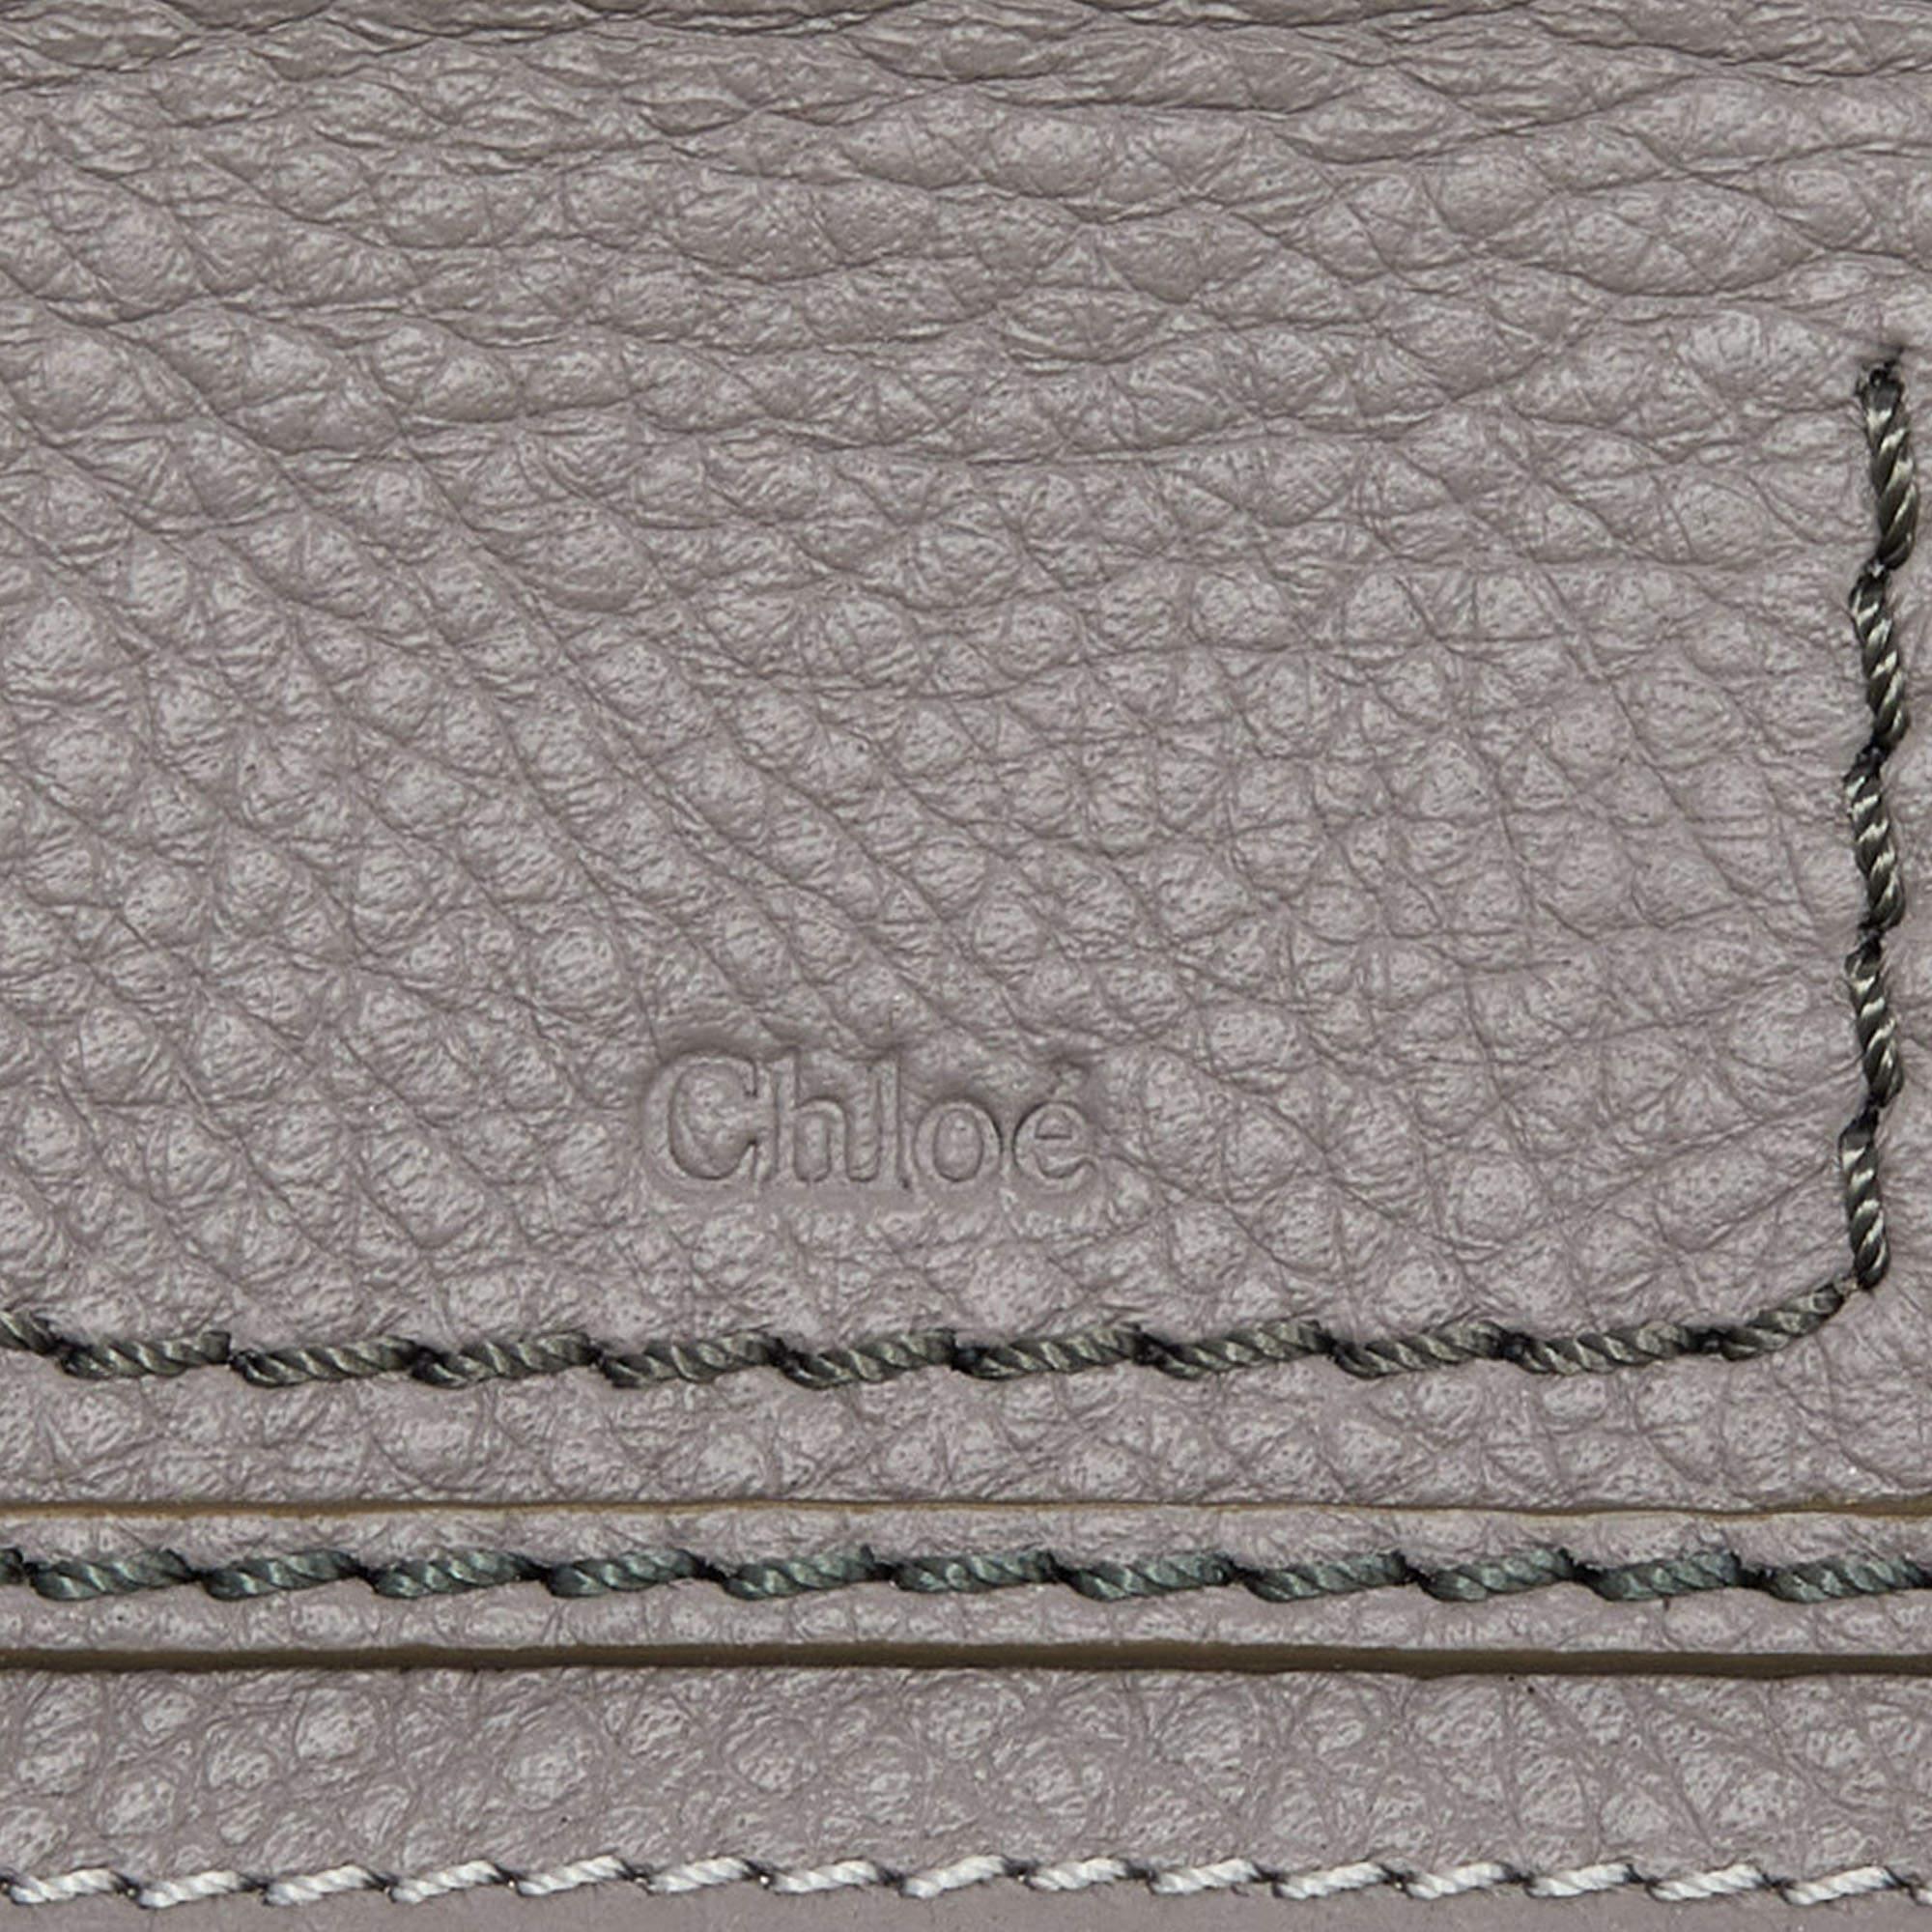 Featuring a leather body, this wallet from Chloe has a double flap style secured with snap button closure. The back button opens to a neatly organized interior fitted with multiple slots, slips pockets and the front flaps secure well-lined